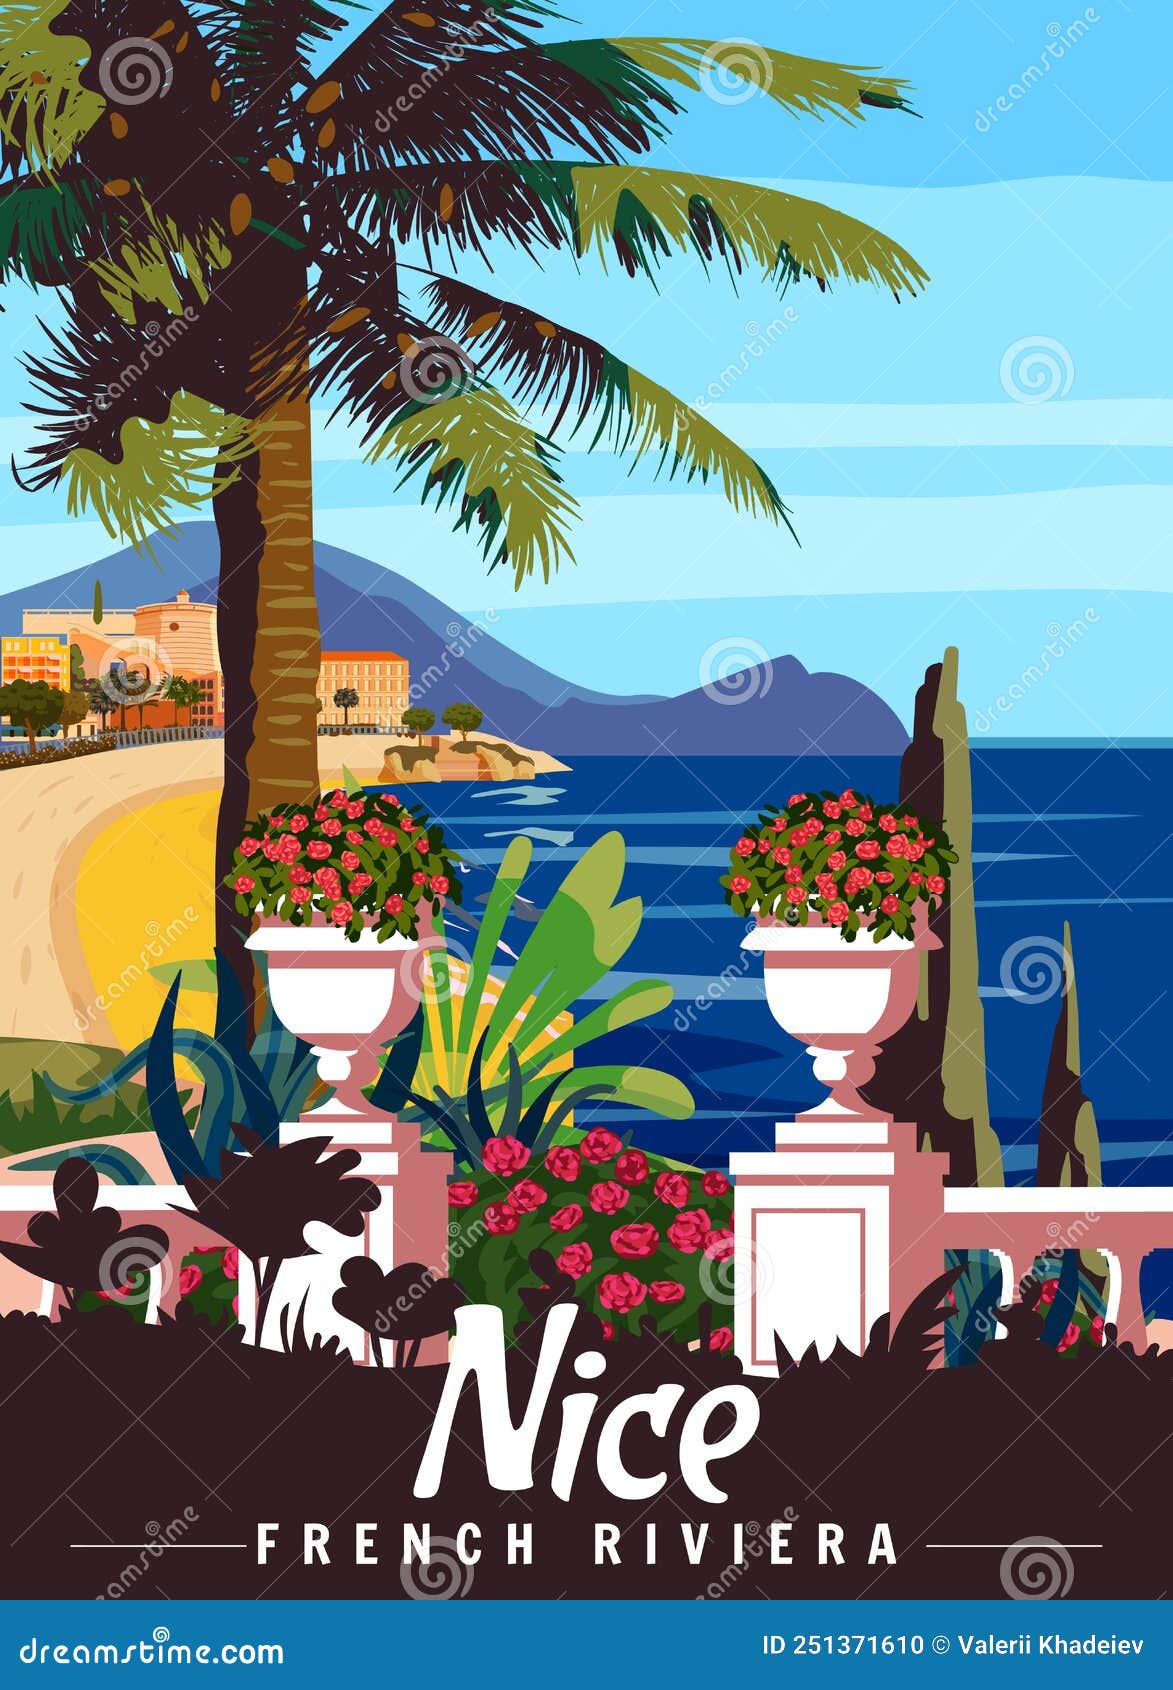 in de buurt Ontbering collegegeld French Riviera Nice Retro Poster. Tropical Coast Scenic View, Palm,  Mediterranean Marine Stock Photo - Image of city, travel: 251371610